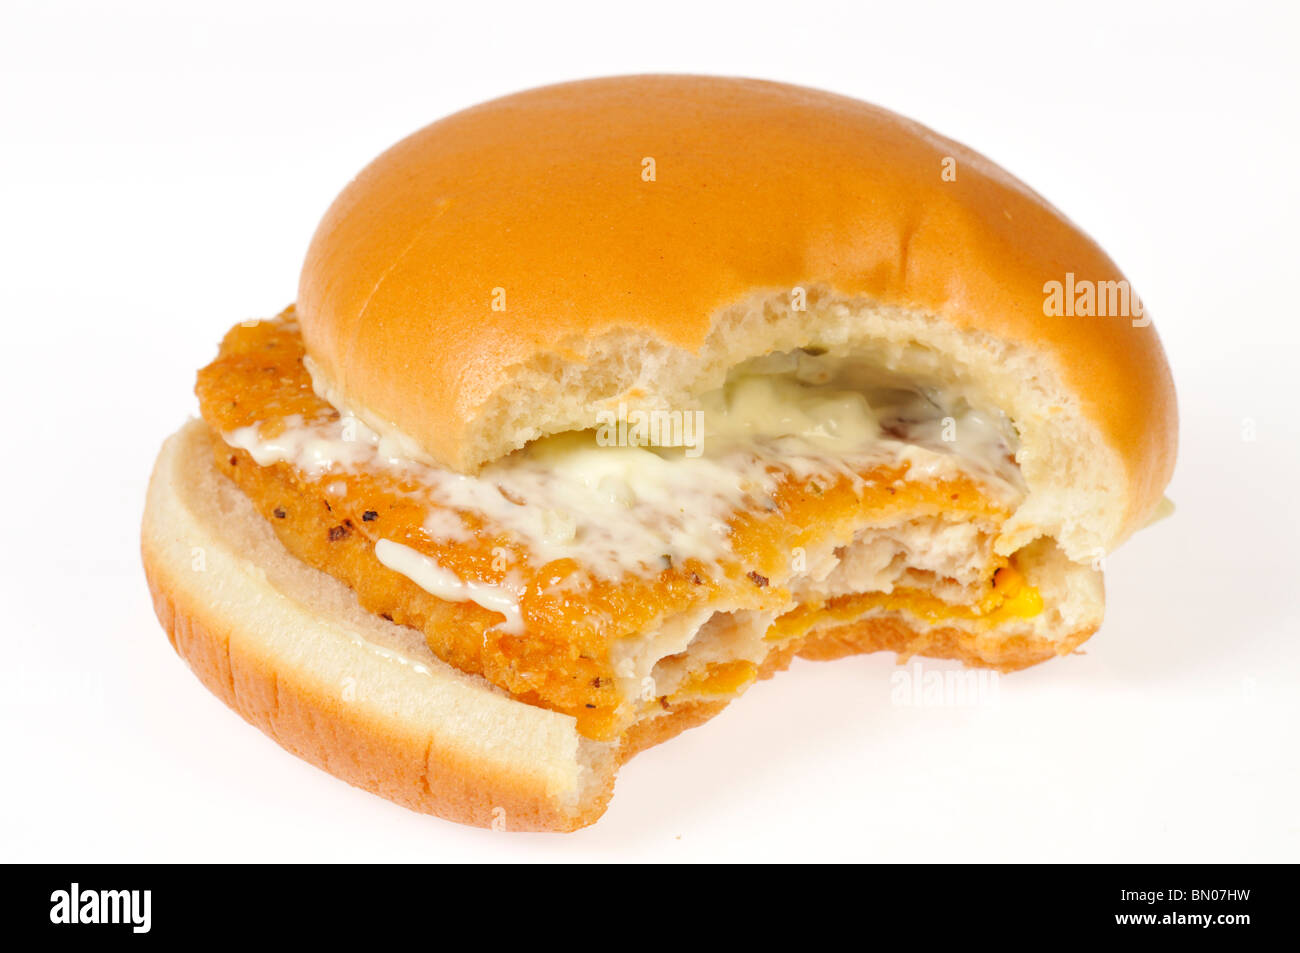 Filet of Fish Sandwich with cheese and covered in tartar sauce on bun with a bite taken from it on white background, cutout. Stock Photo